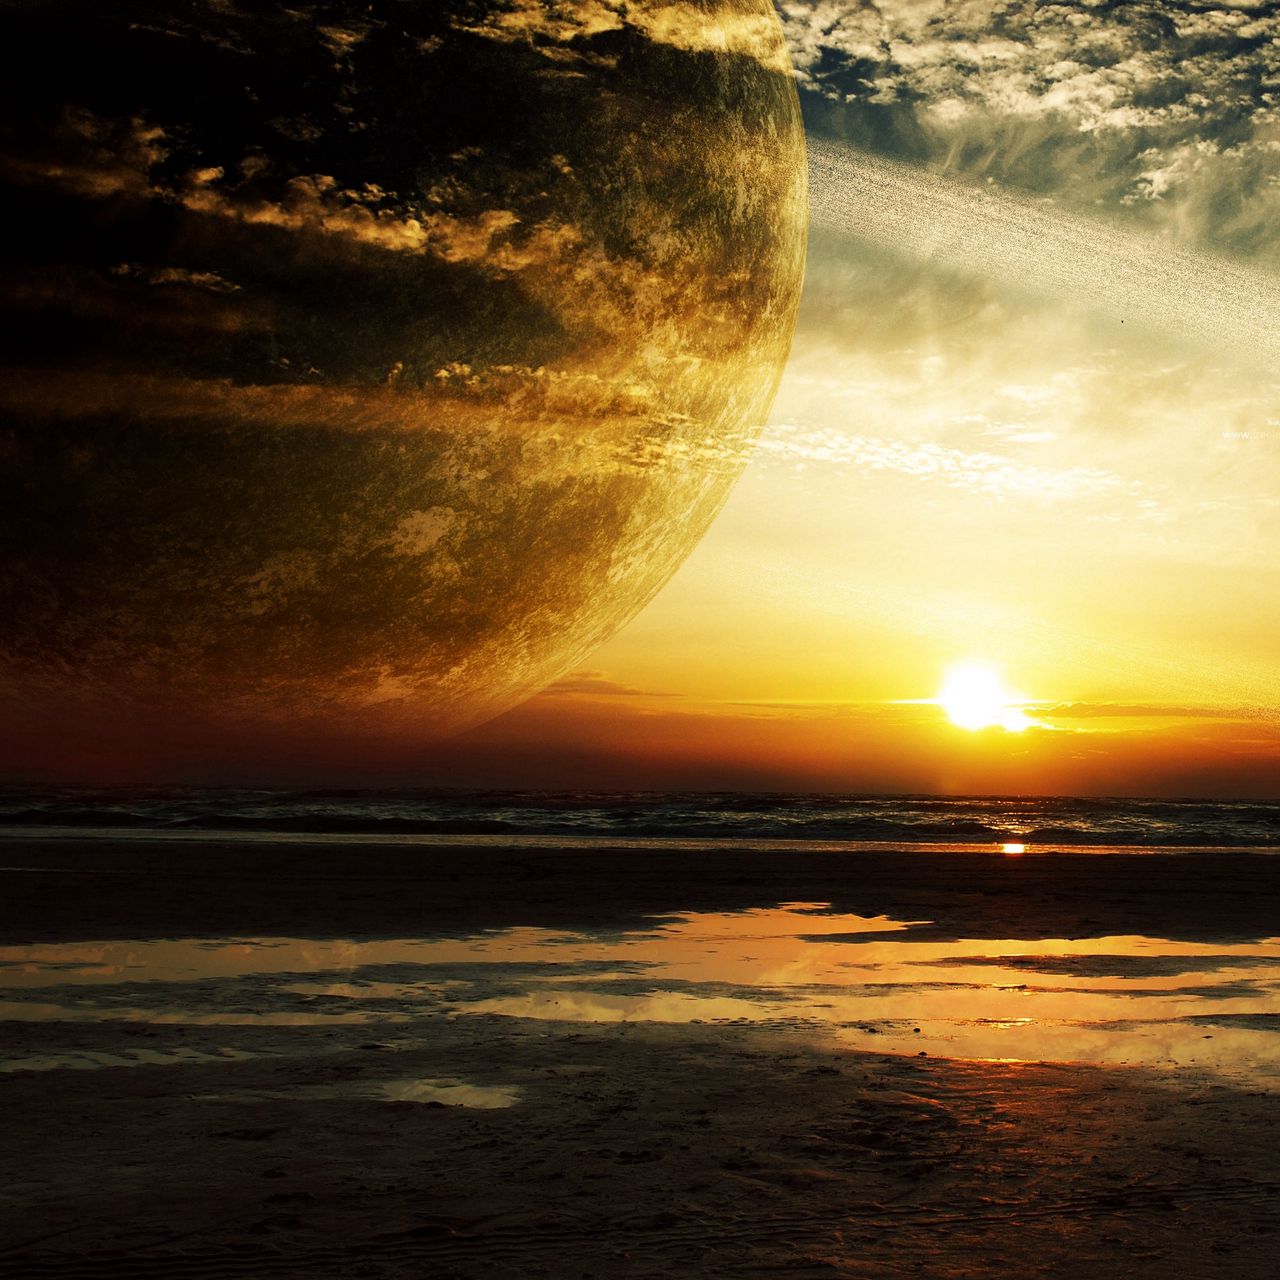 Sunset Planets Wallpapers